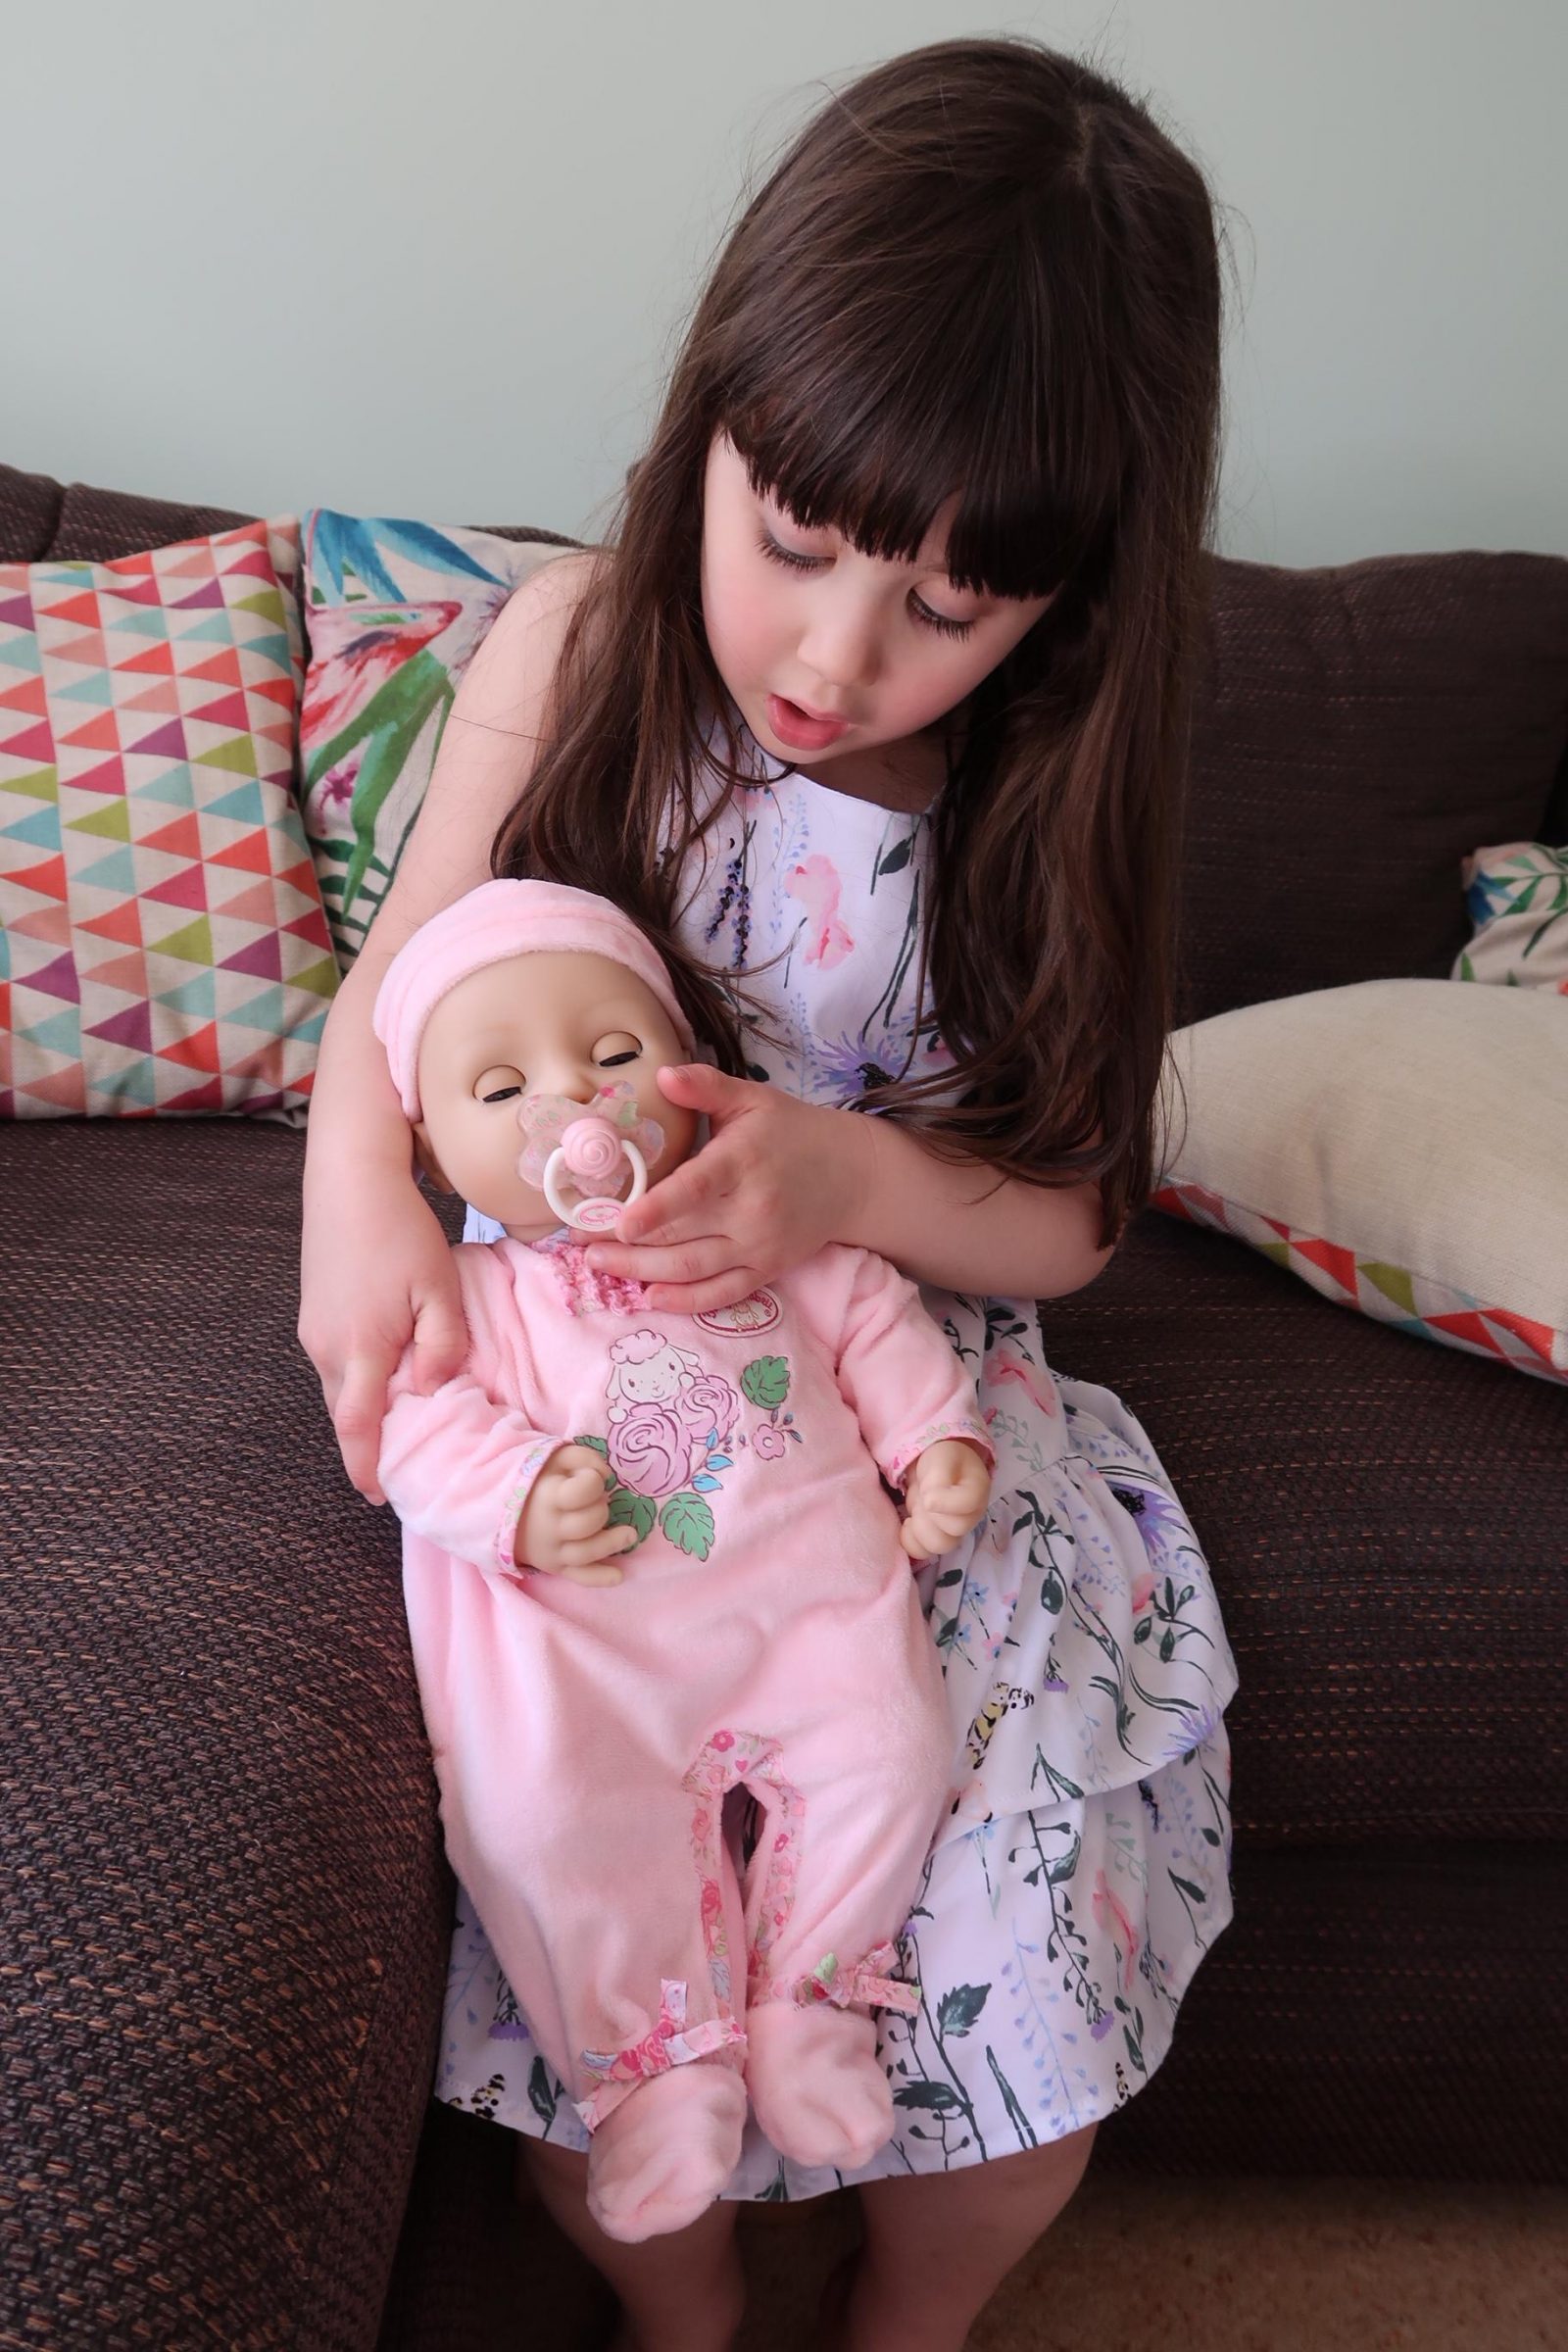 girl holding interactive baby Annabell doll